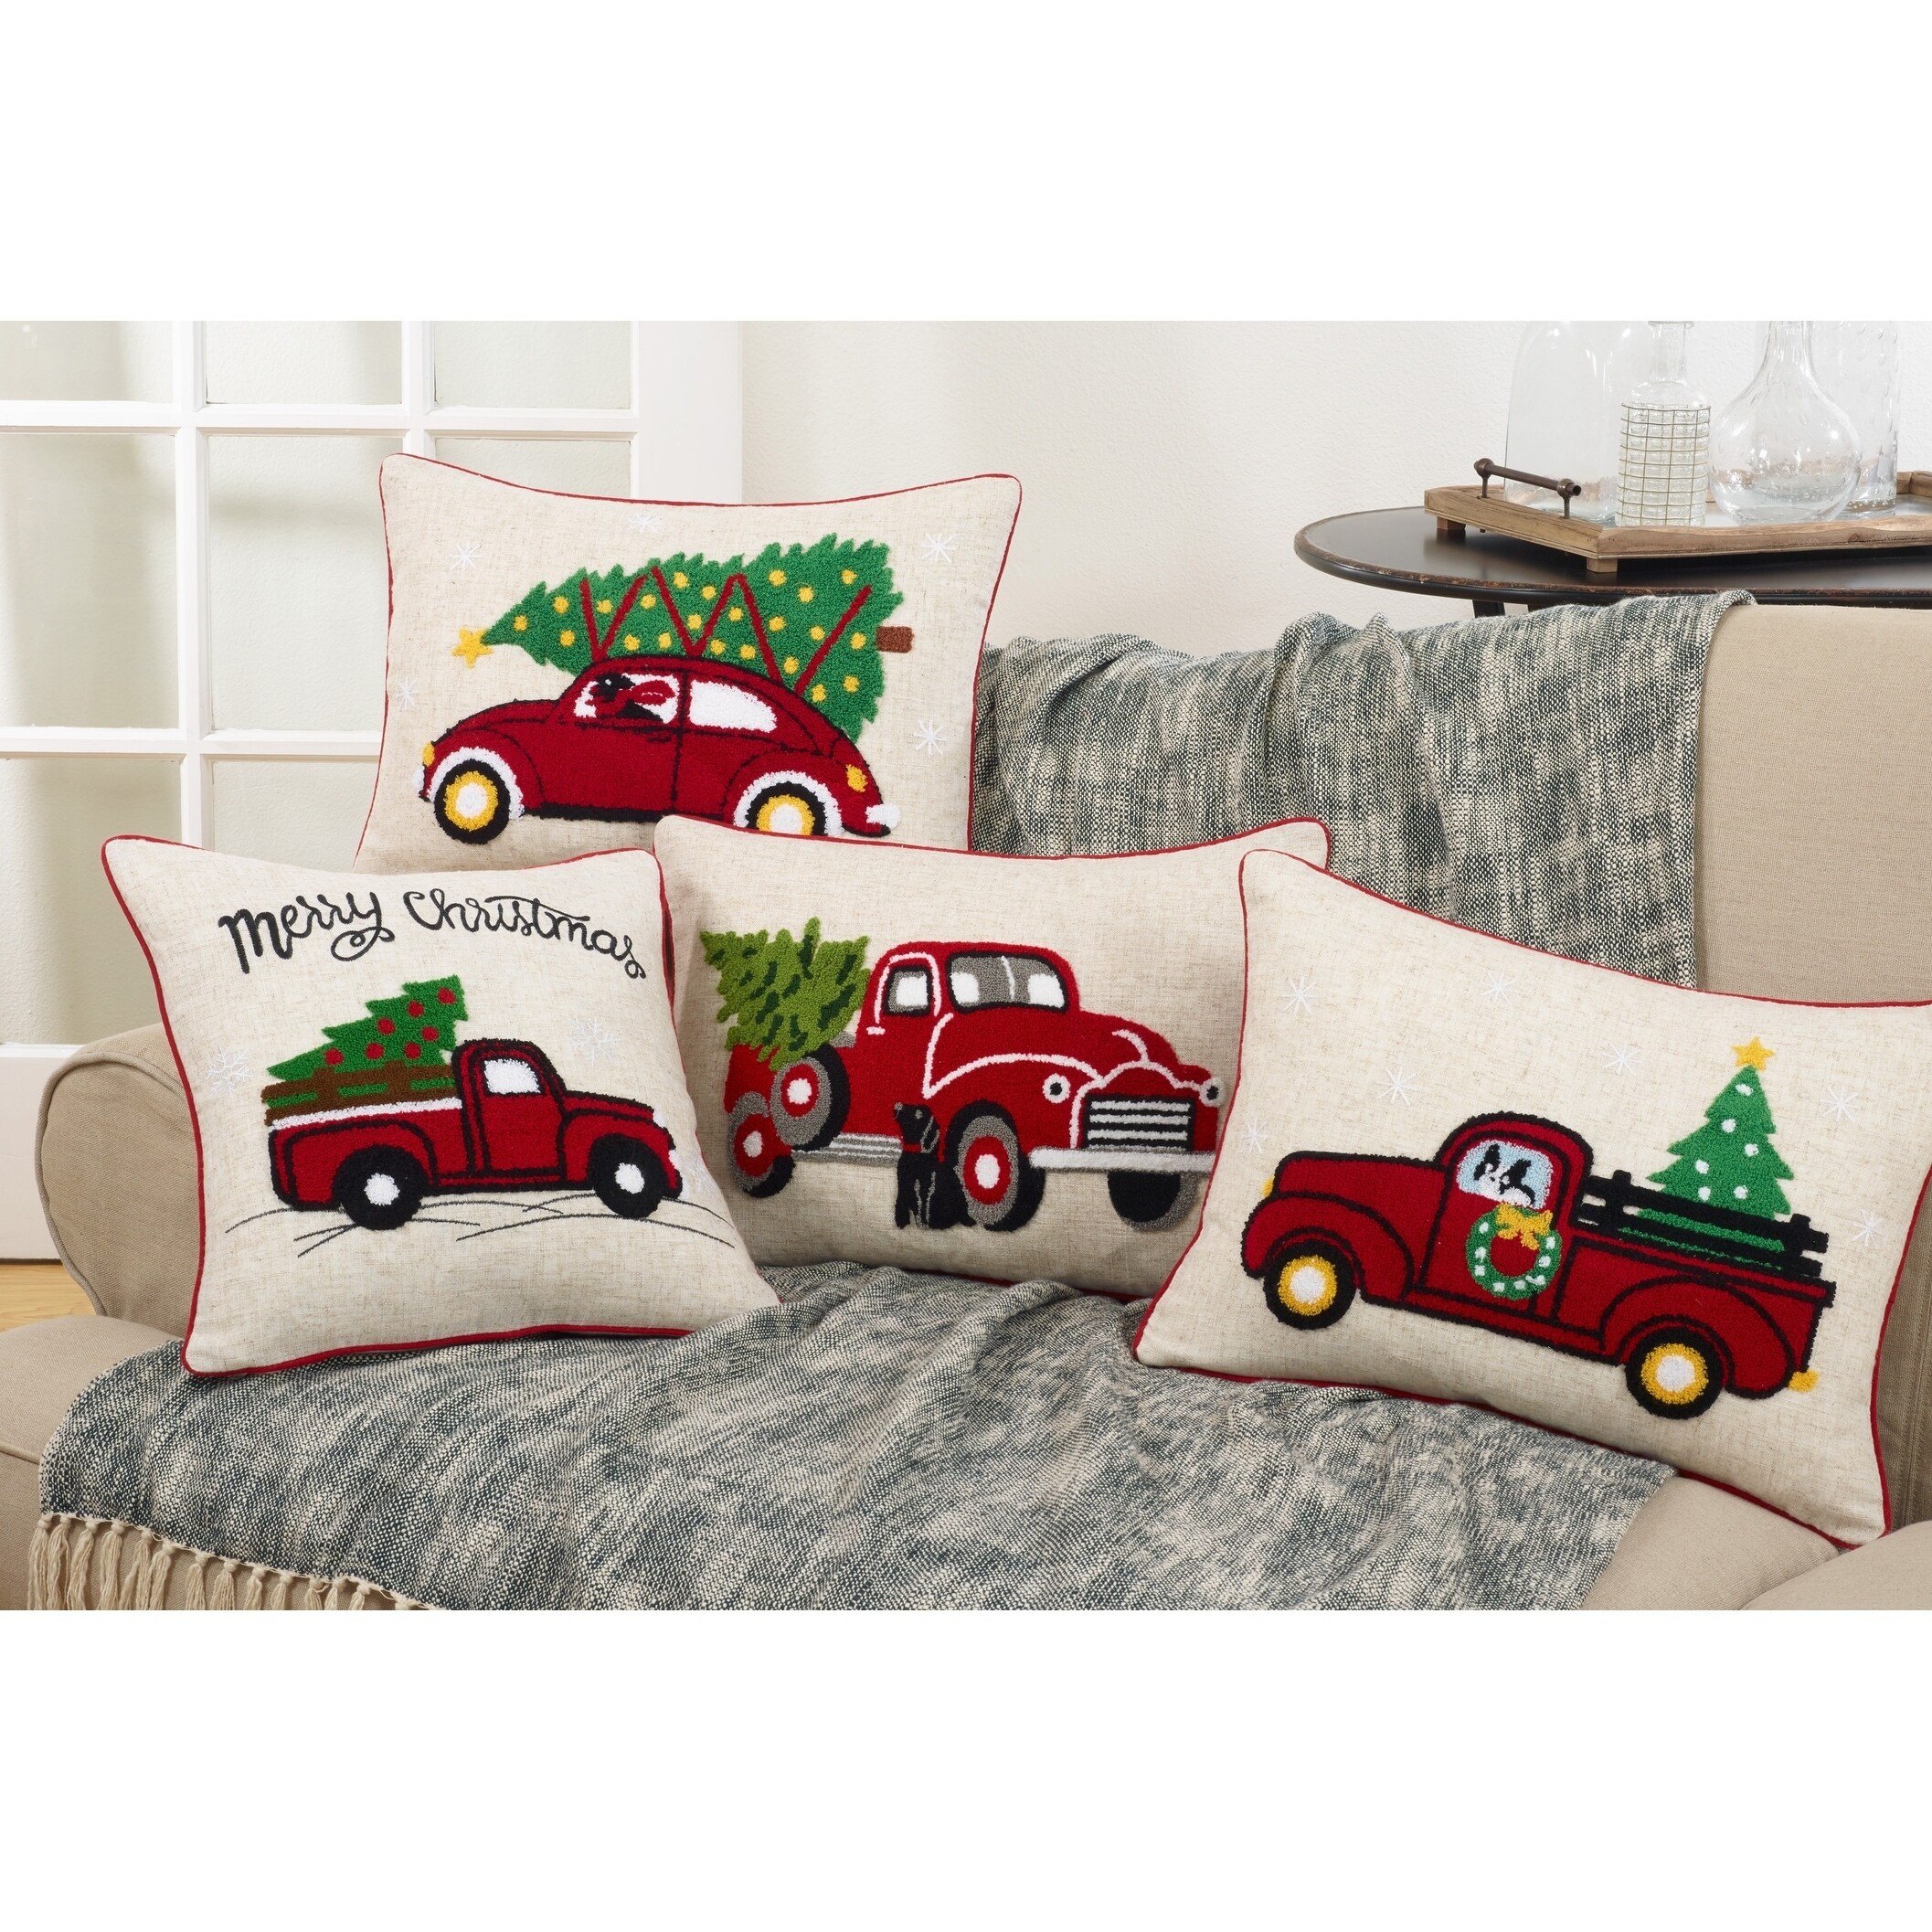 https://ak1.ostkcdn.com/images/products/22858892/Down-Filled-Poly-Blend-Christmas-Pillow-With-Vintage-Red-Truck-548f8454-90c5-4875-80ce-0dff0d4c3b82.jpg